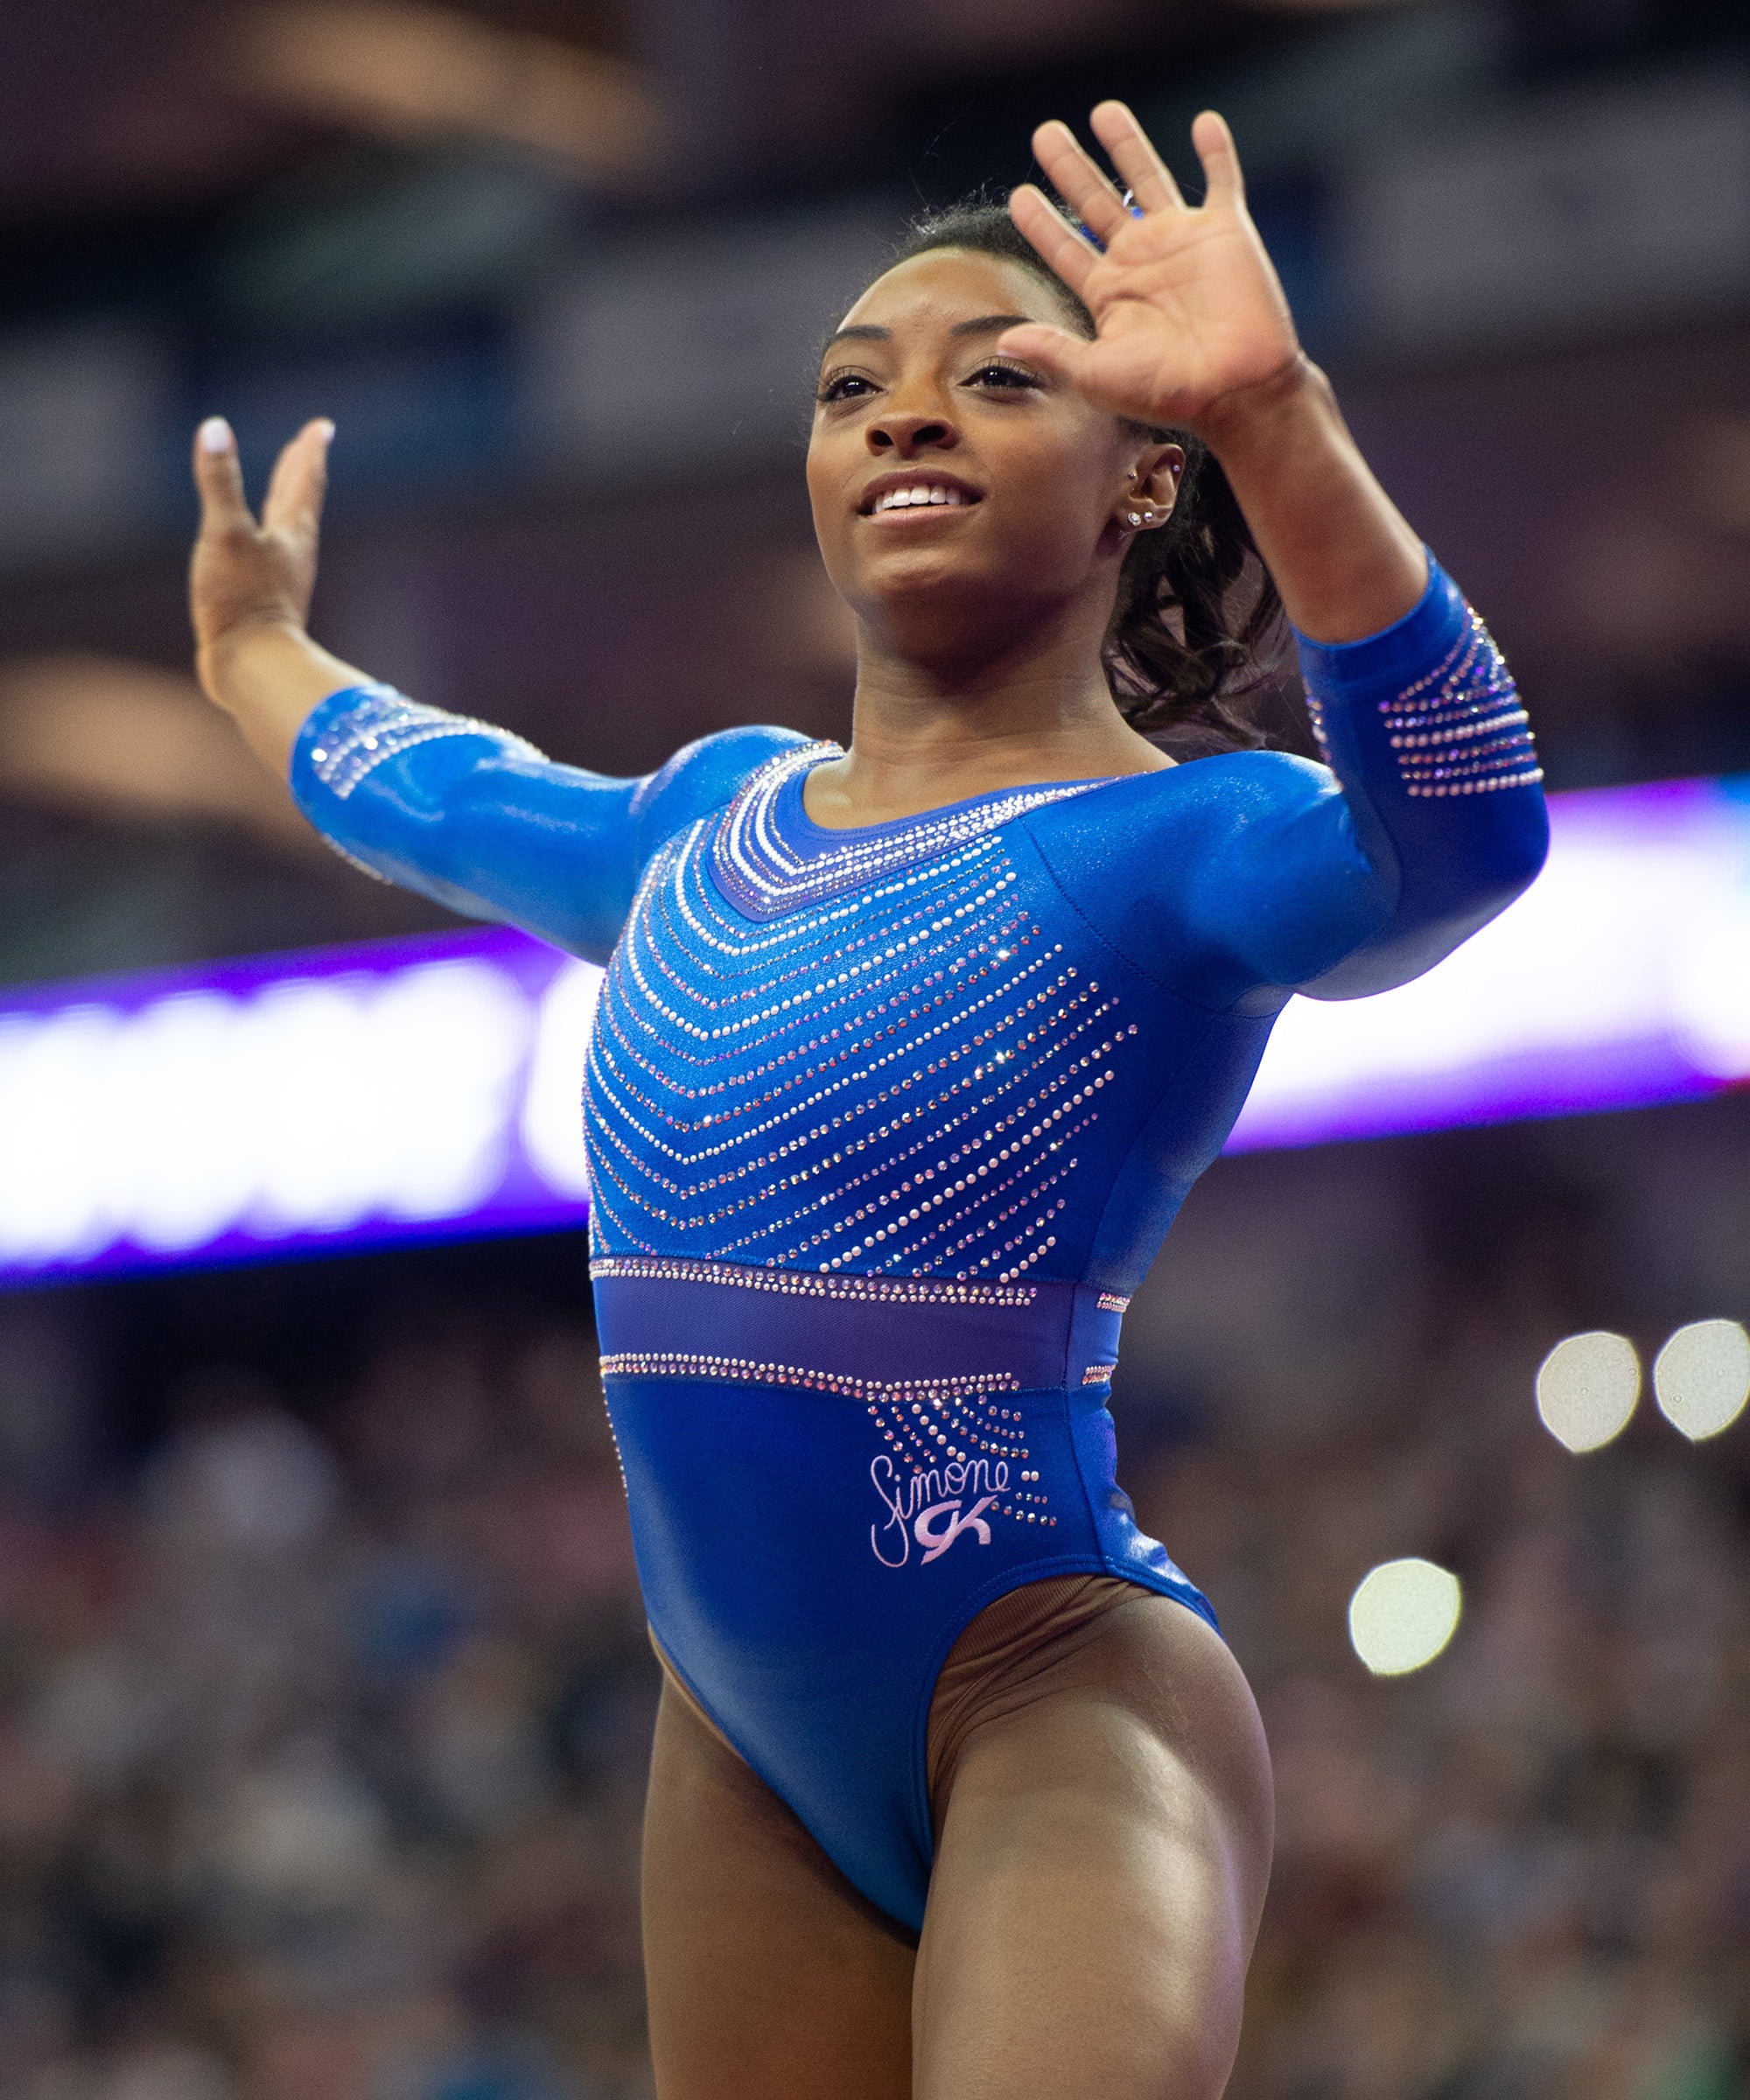 Simone Biles: The Gymnast is back for her second SI Swim shoot